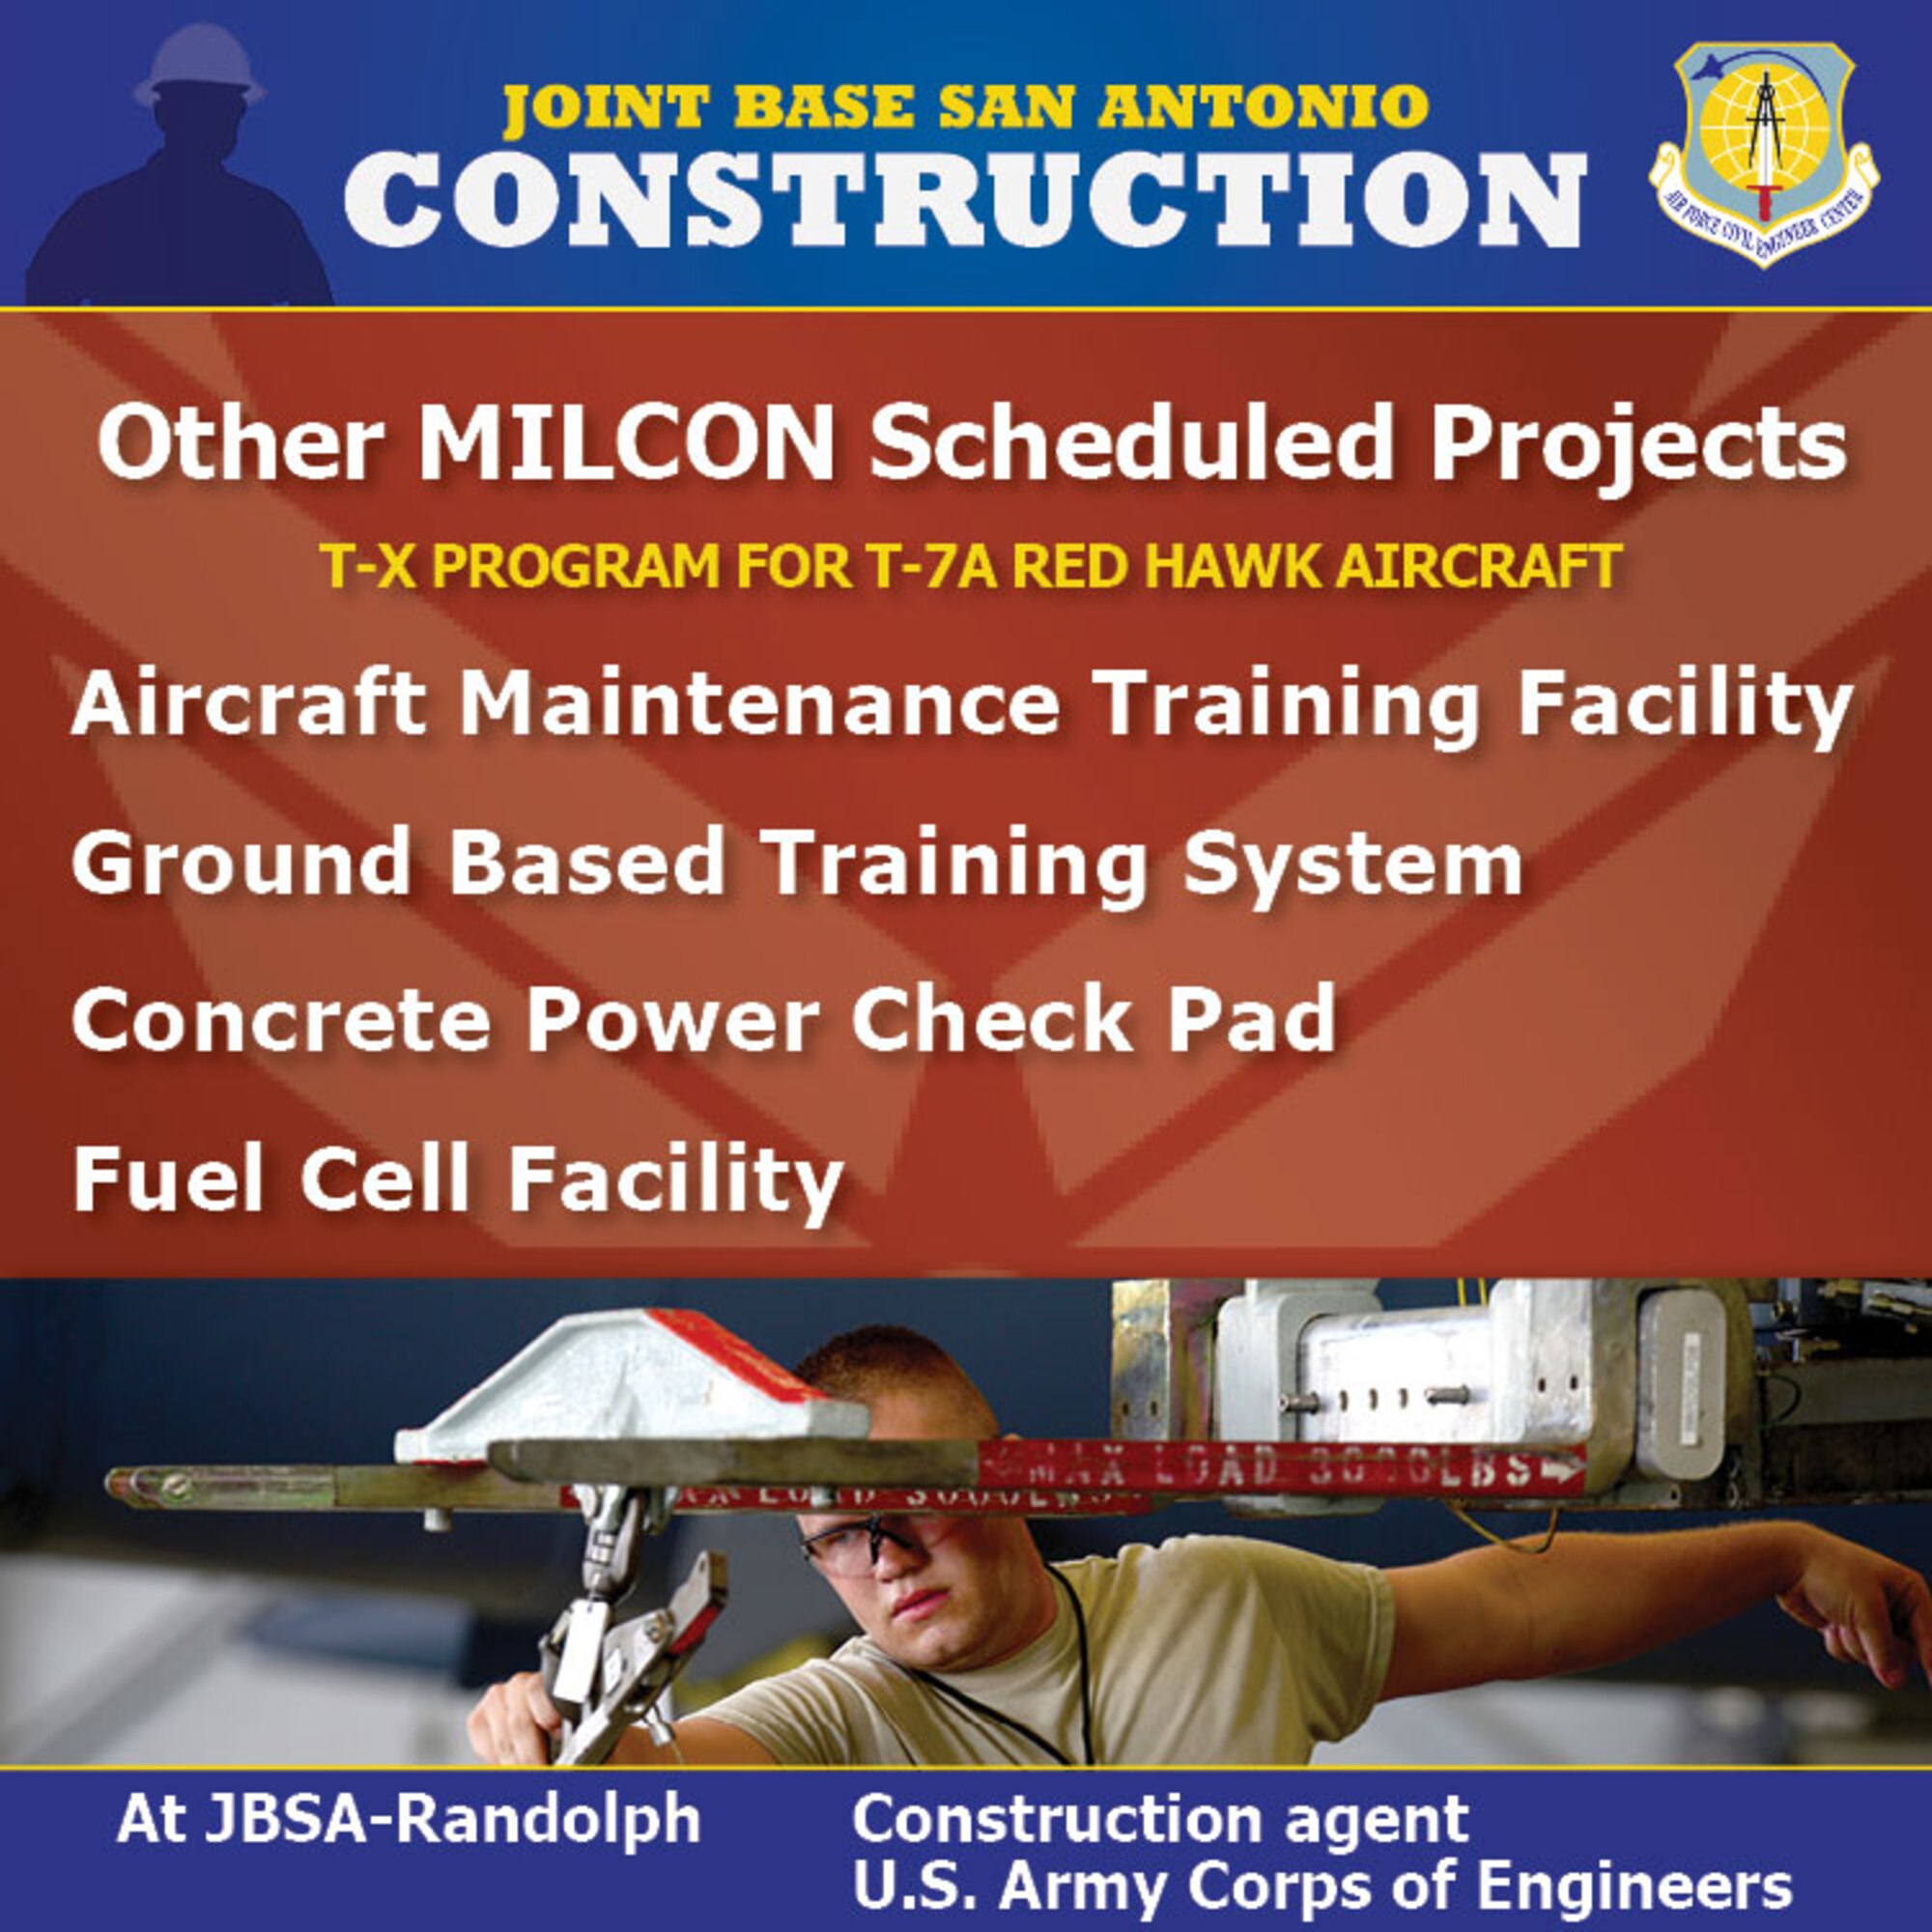 Graphic for military construction at JBSA-Randolph